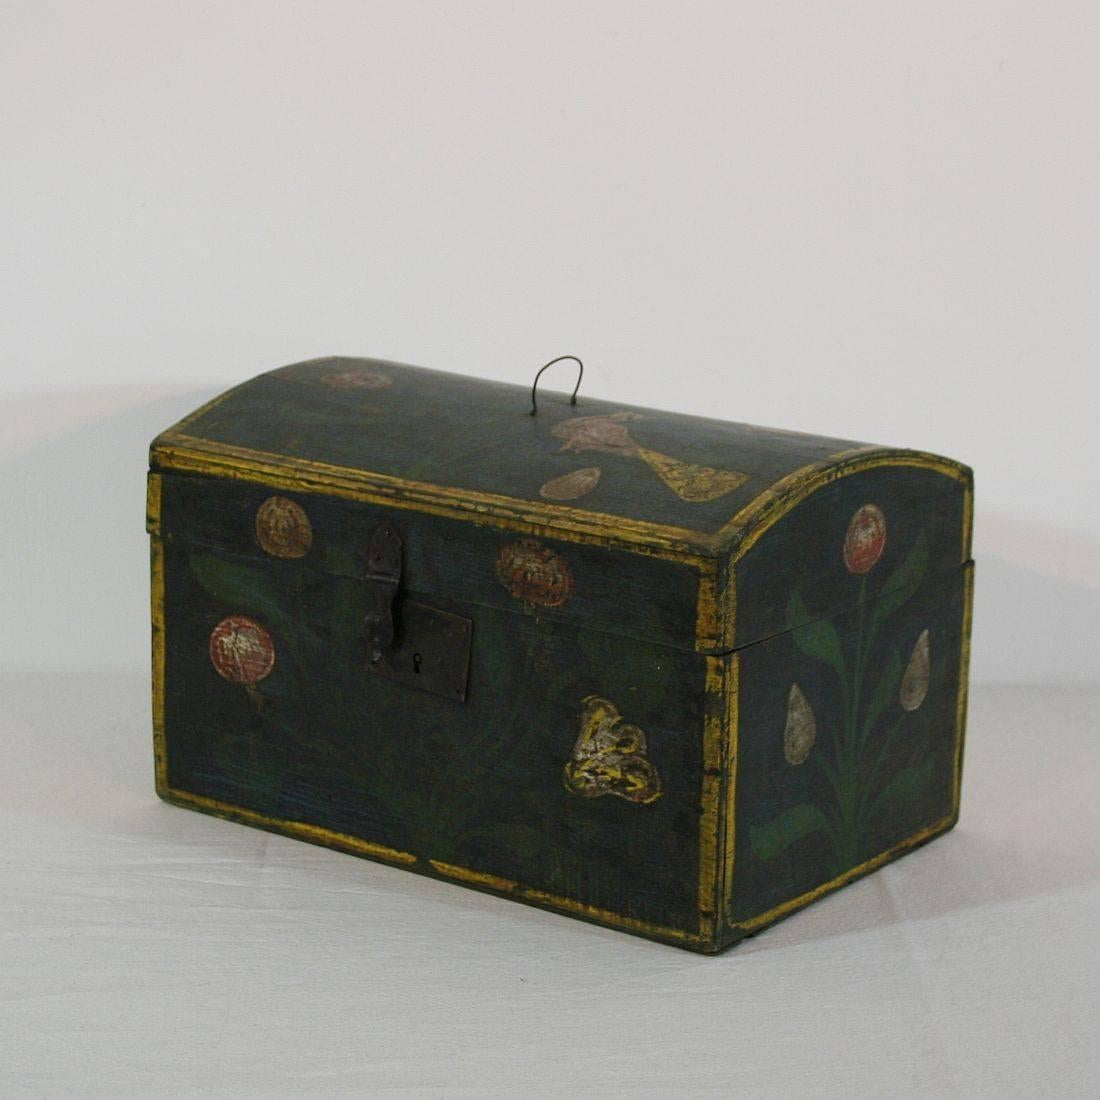 Painted 19th Century French Folk Art Weddingbox with a Bird from Normandy